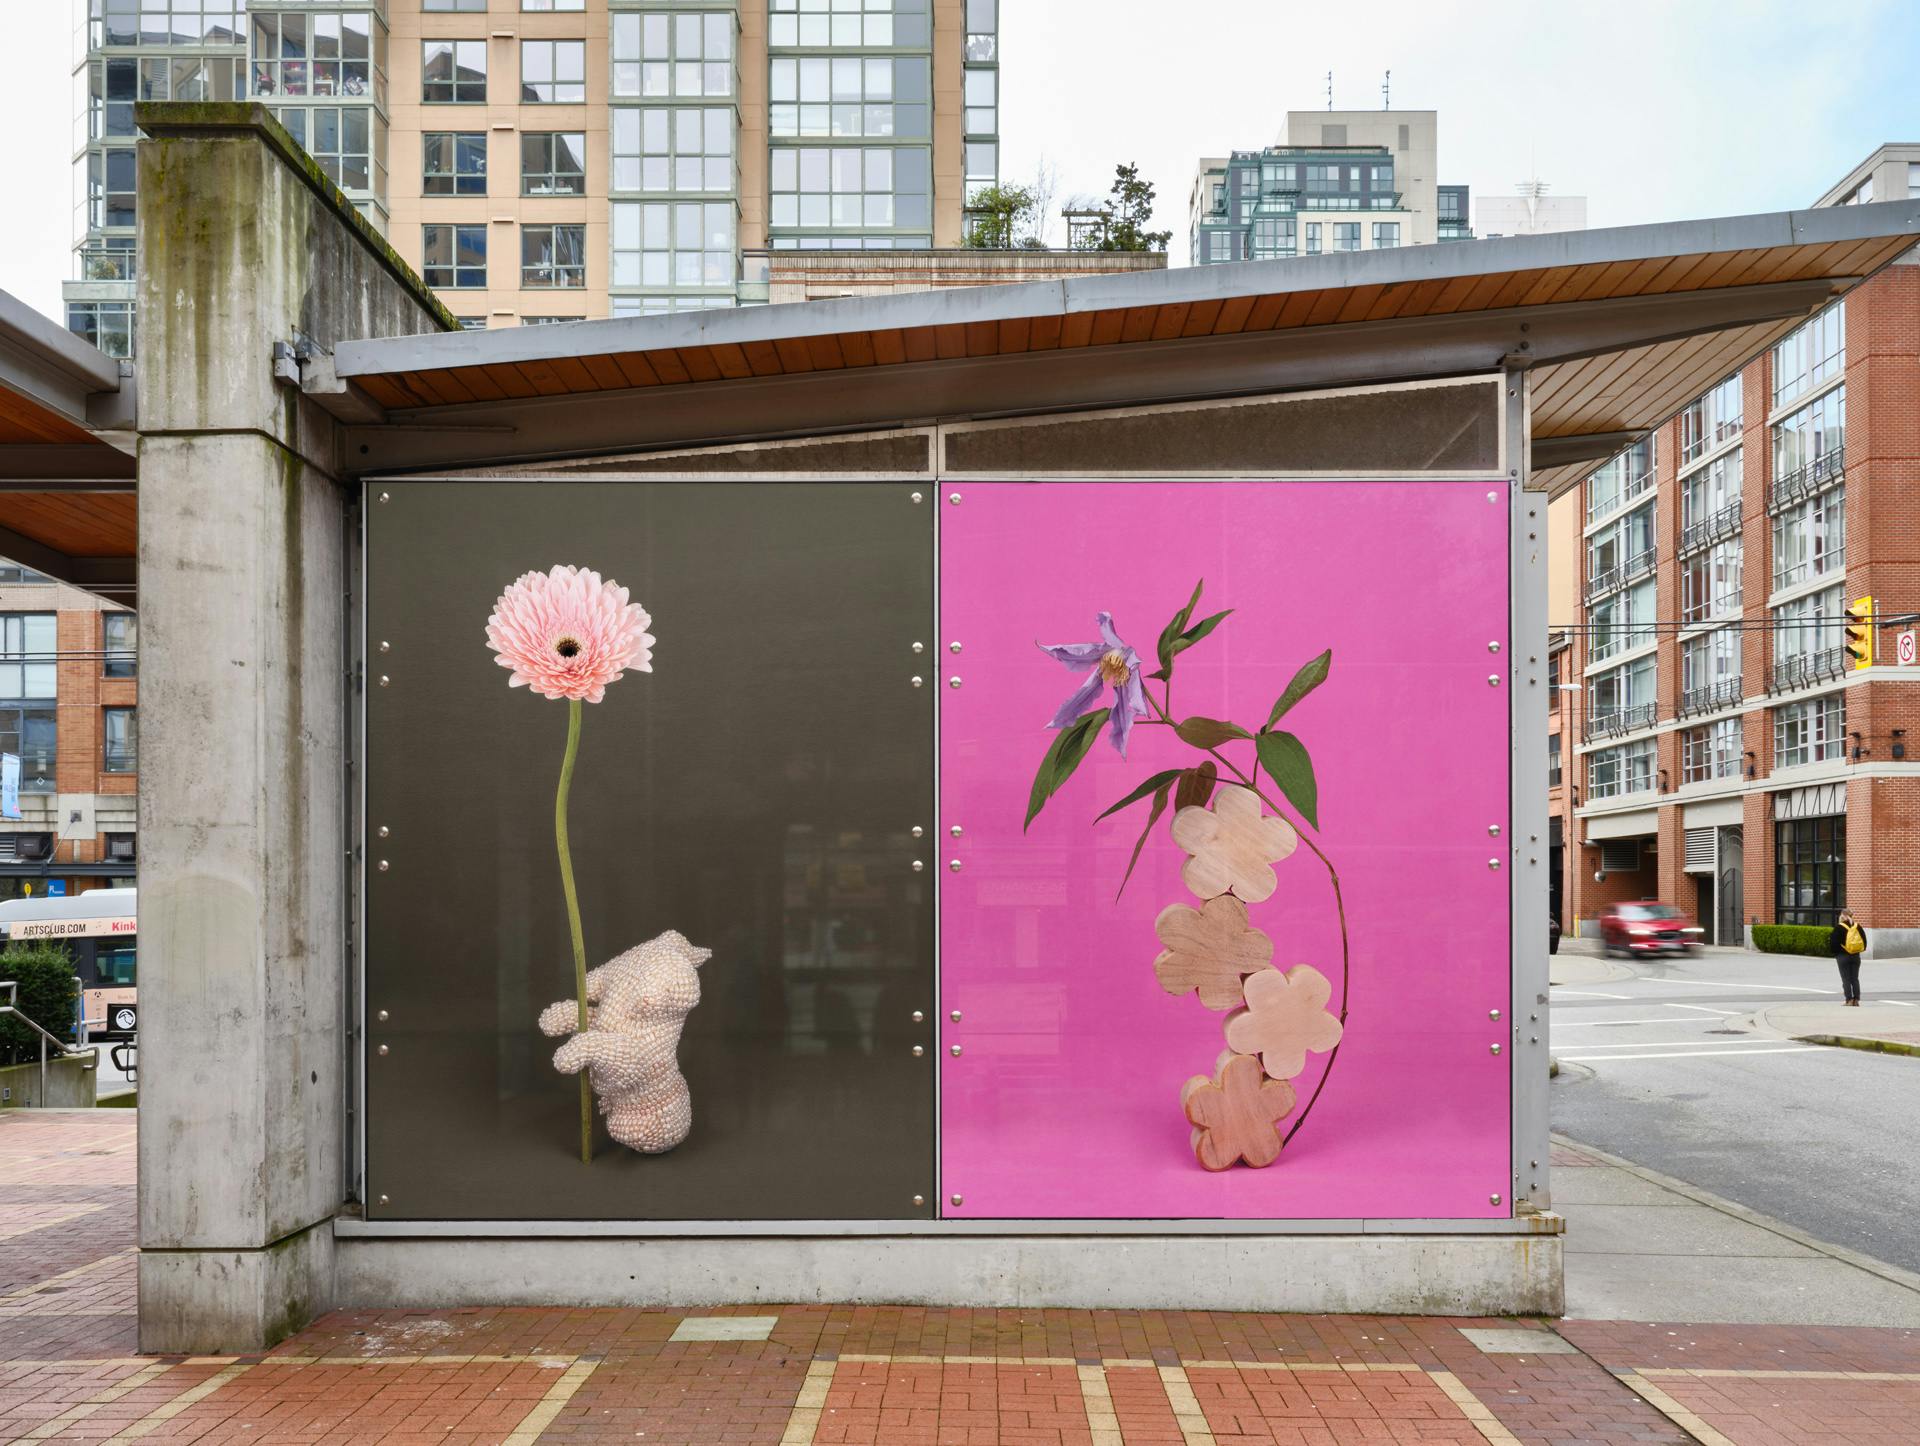 Two large-scale still life photographs printed in vinyl cover an entire side of Yaletown-Roundhouse station. The images depict singular flowers with various objects on pink and brown backgrounds. 